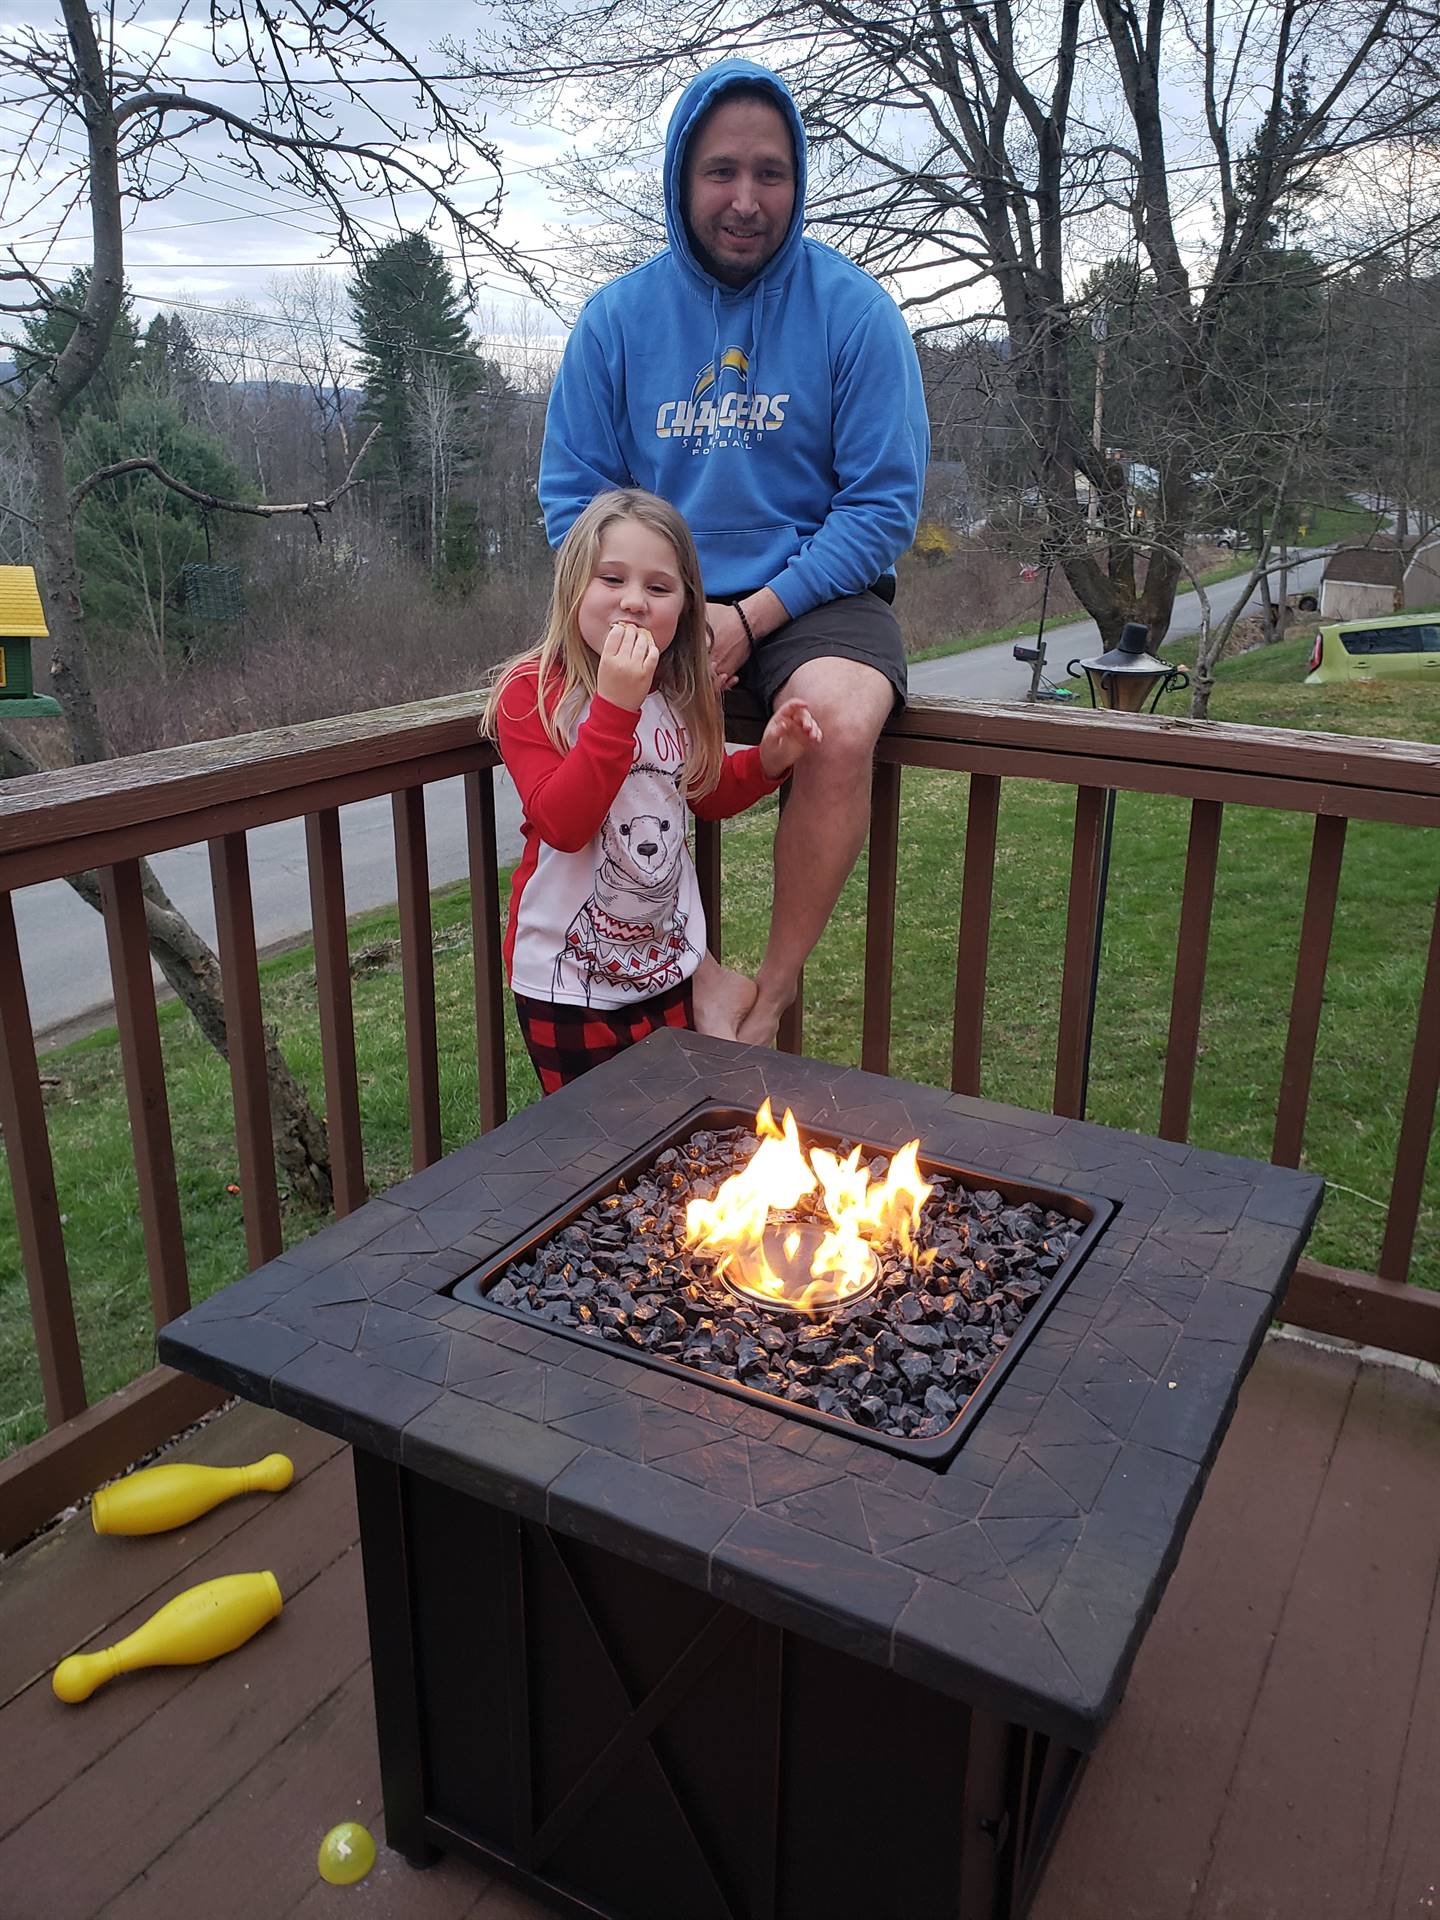 A child and her dad by the fire.